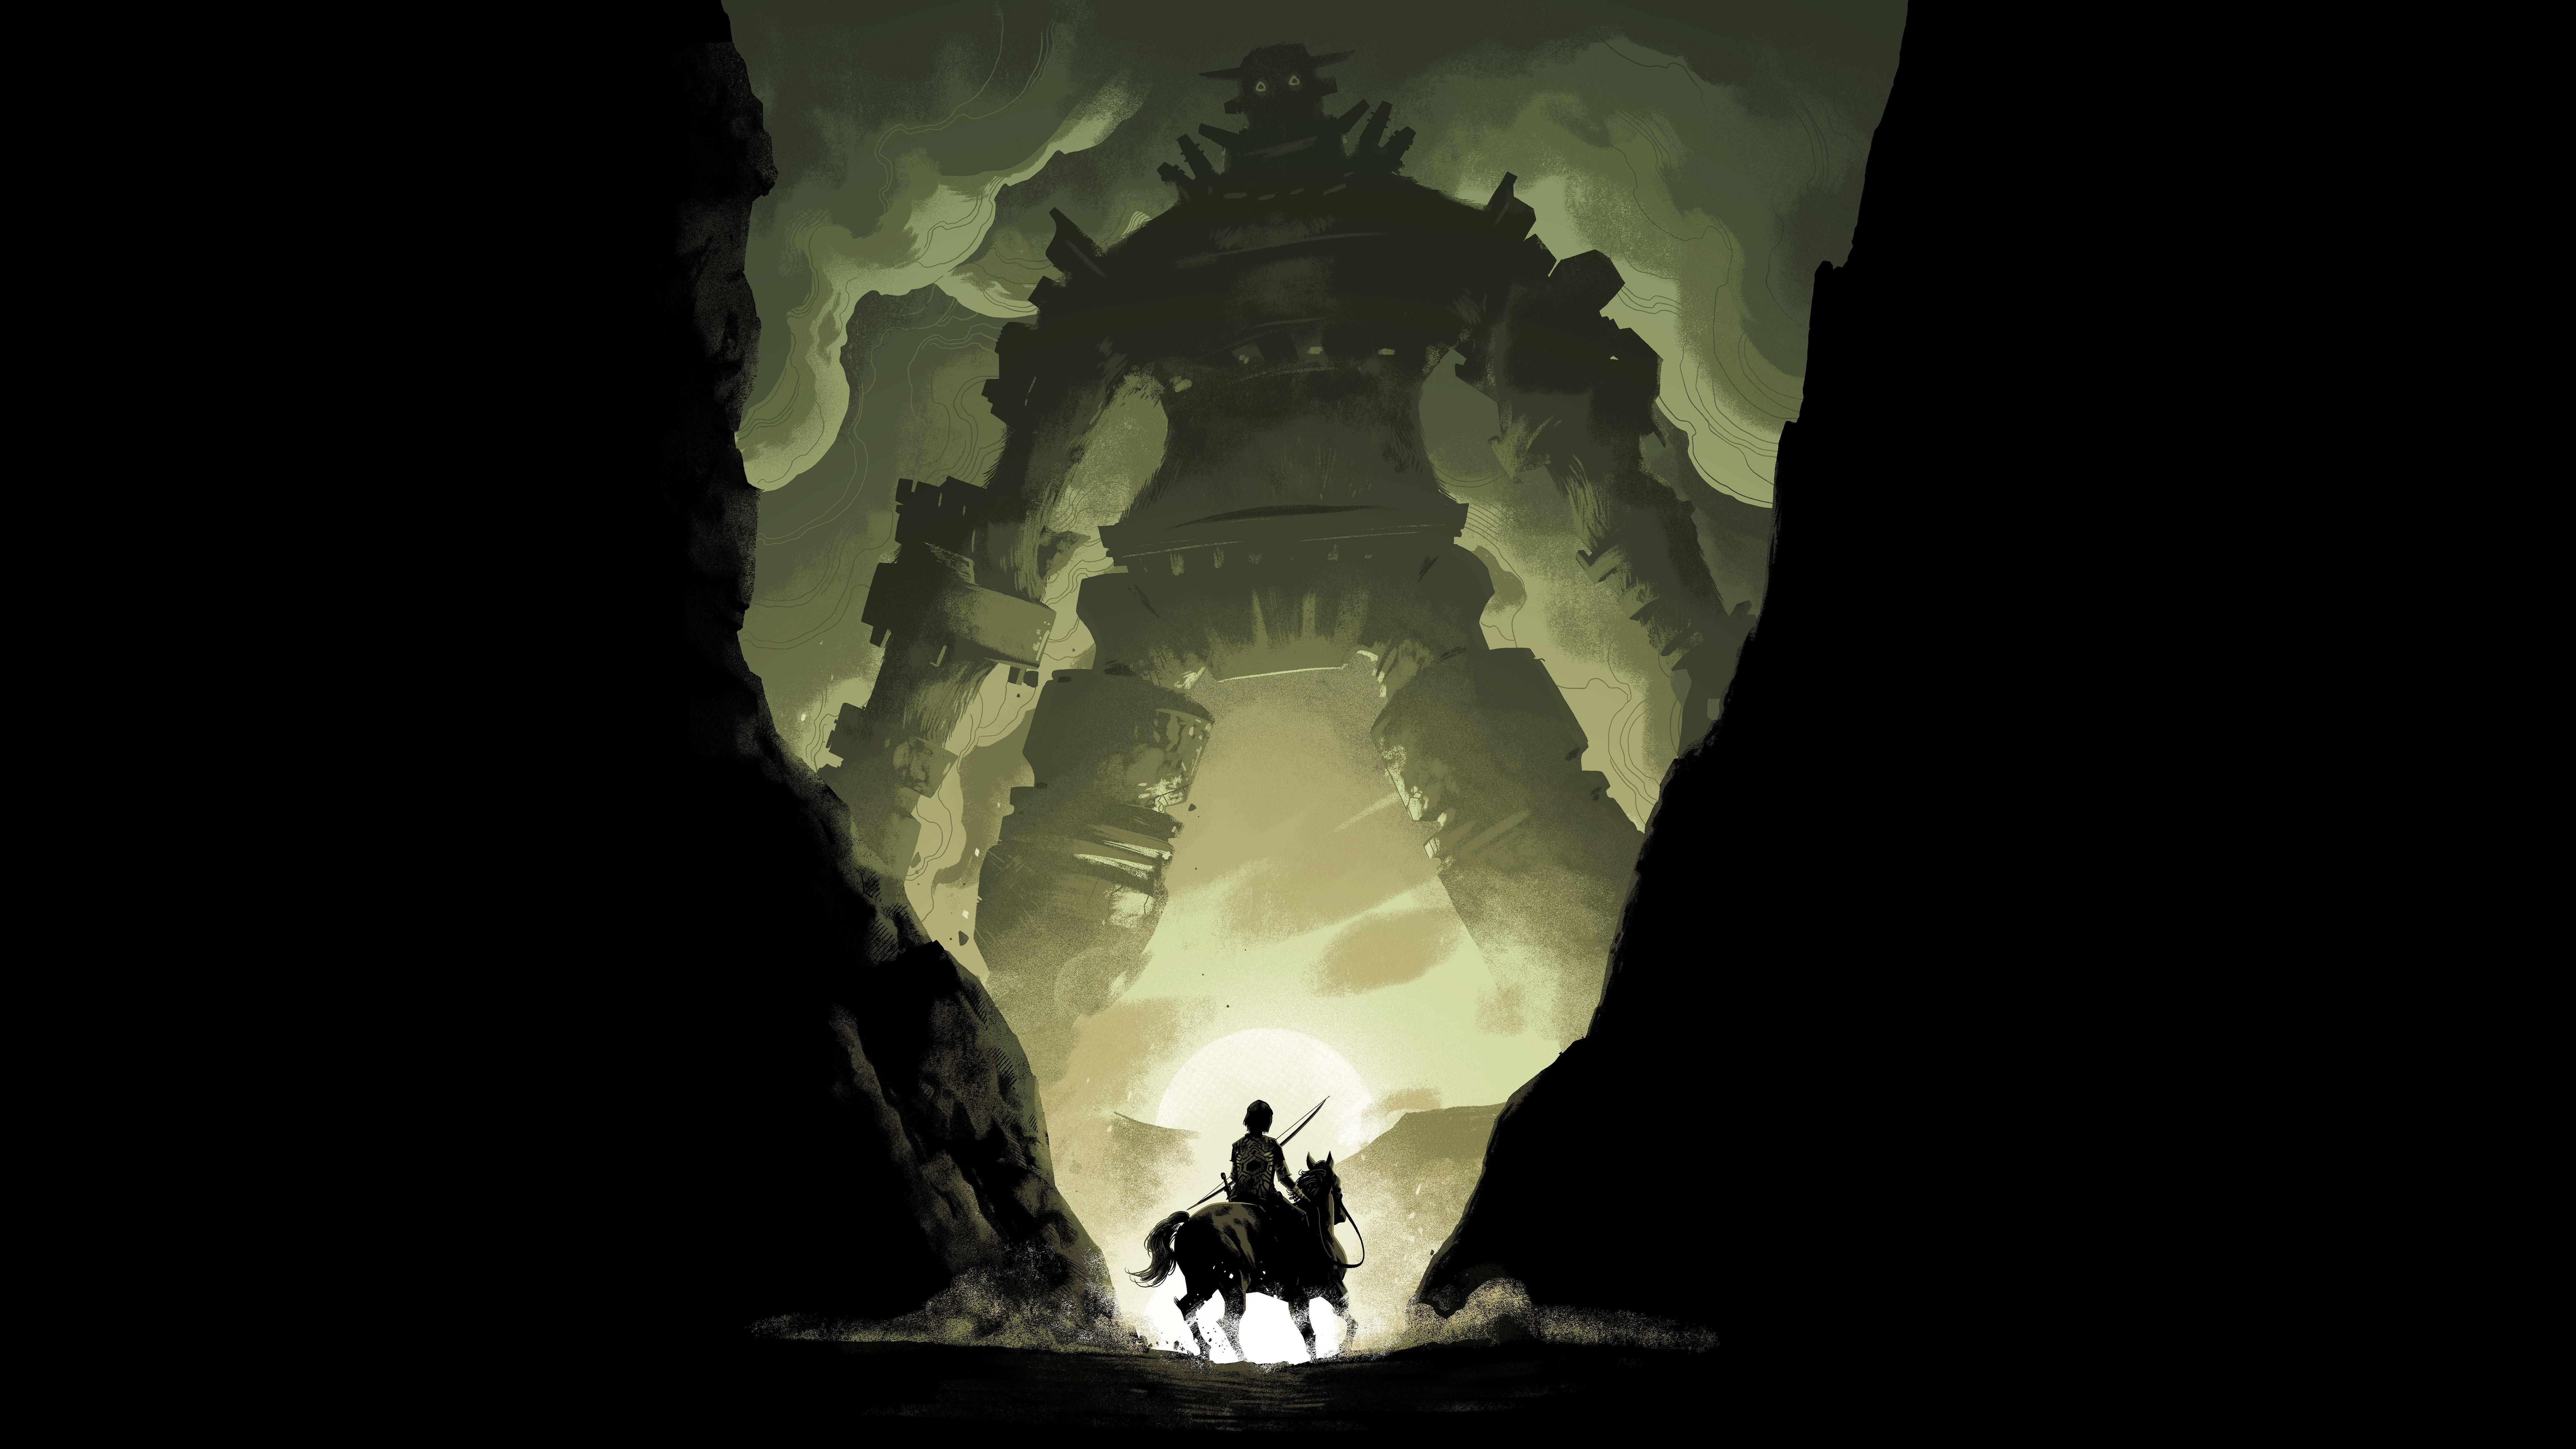 Shadow Of The Colossus Hd Wallpapers For Pc - Wallpaperforu